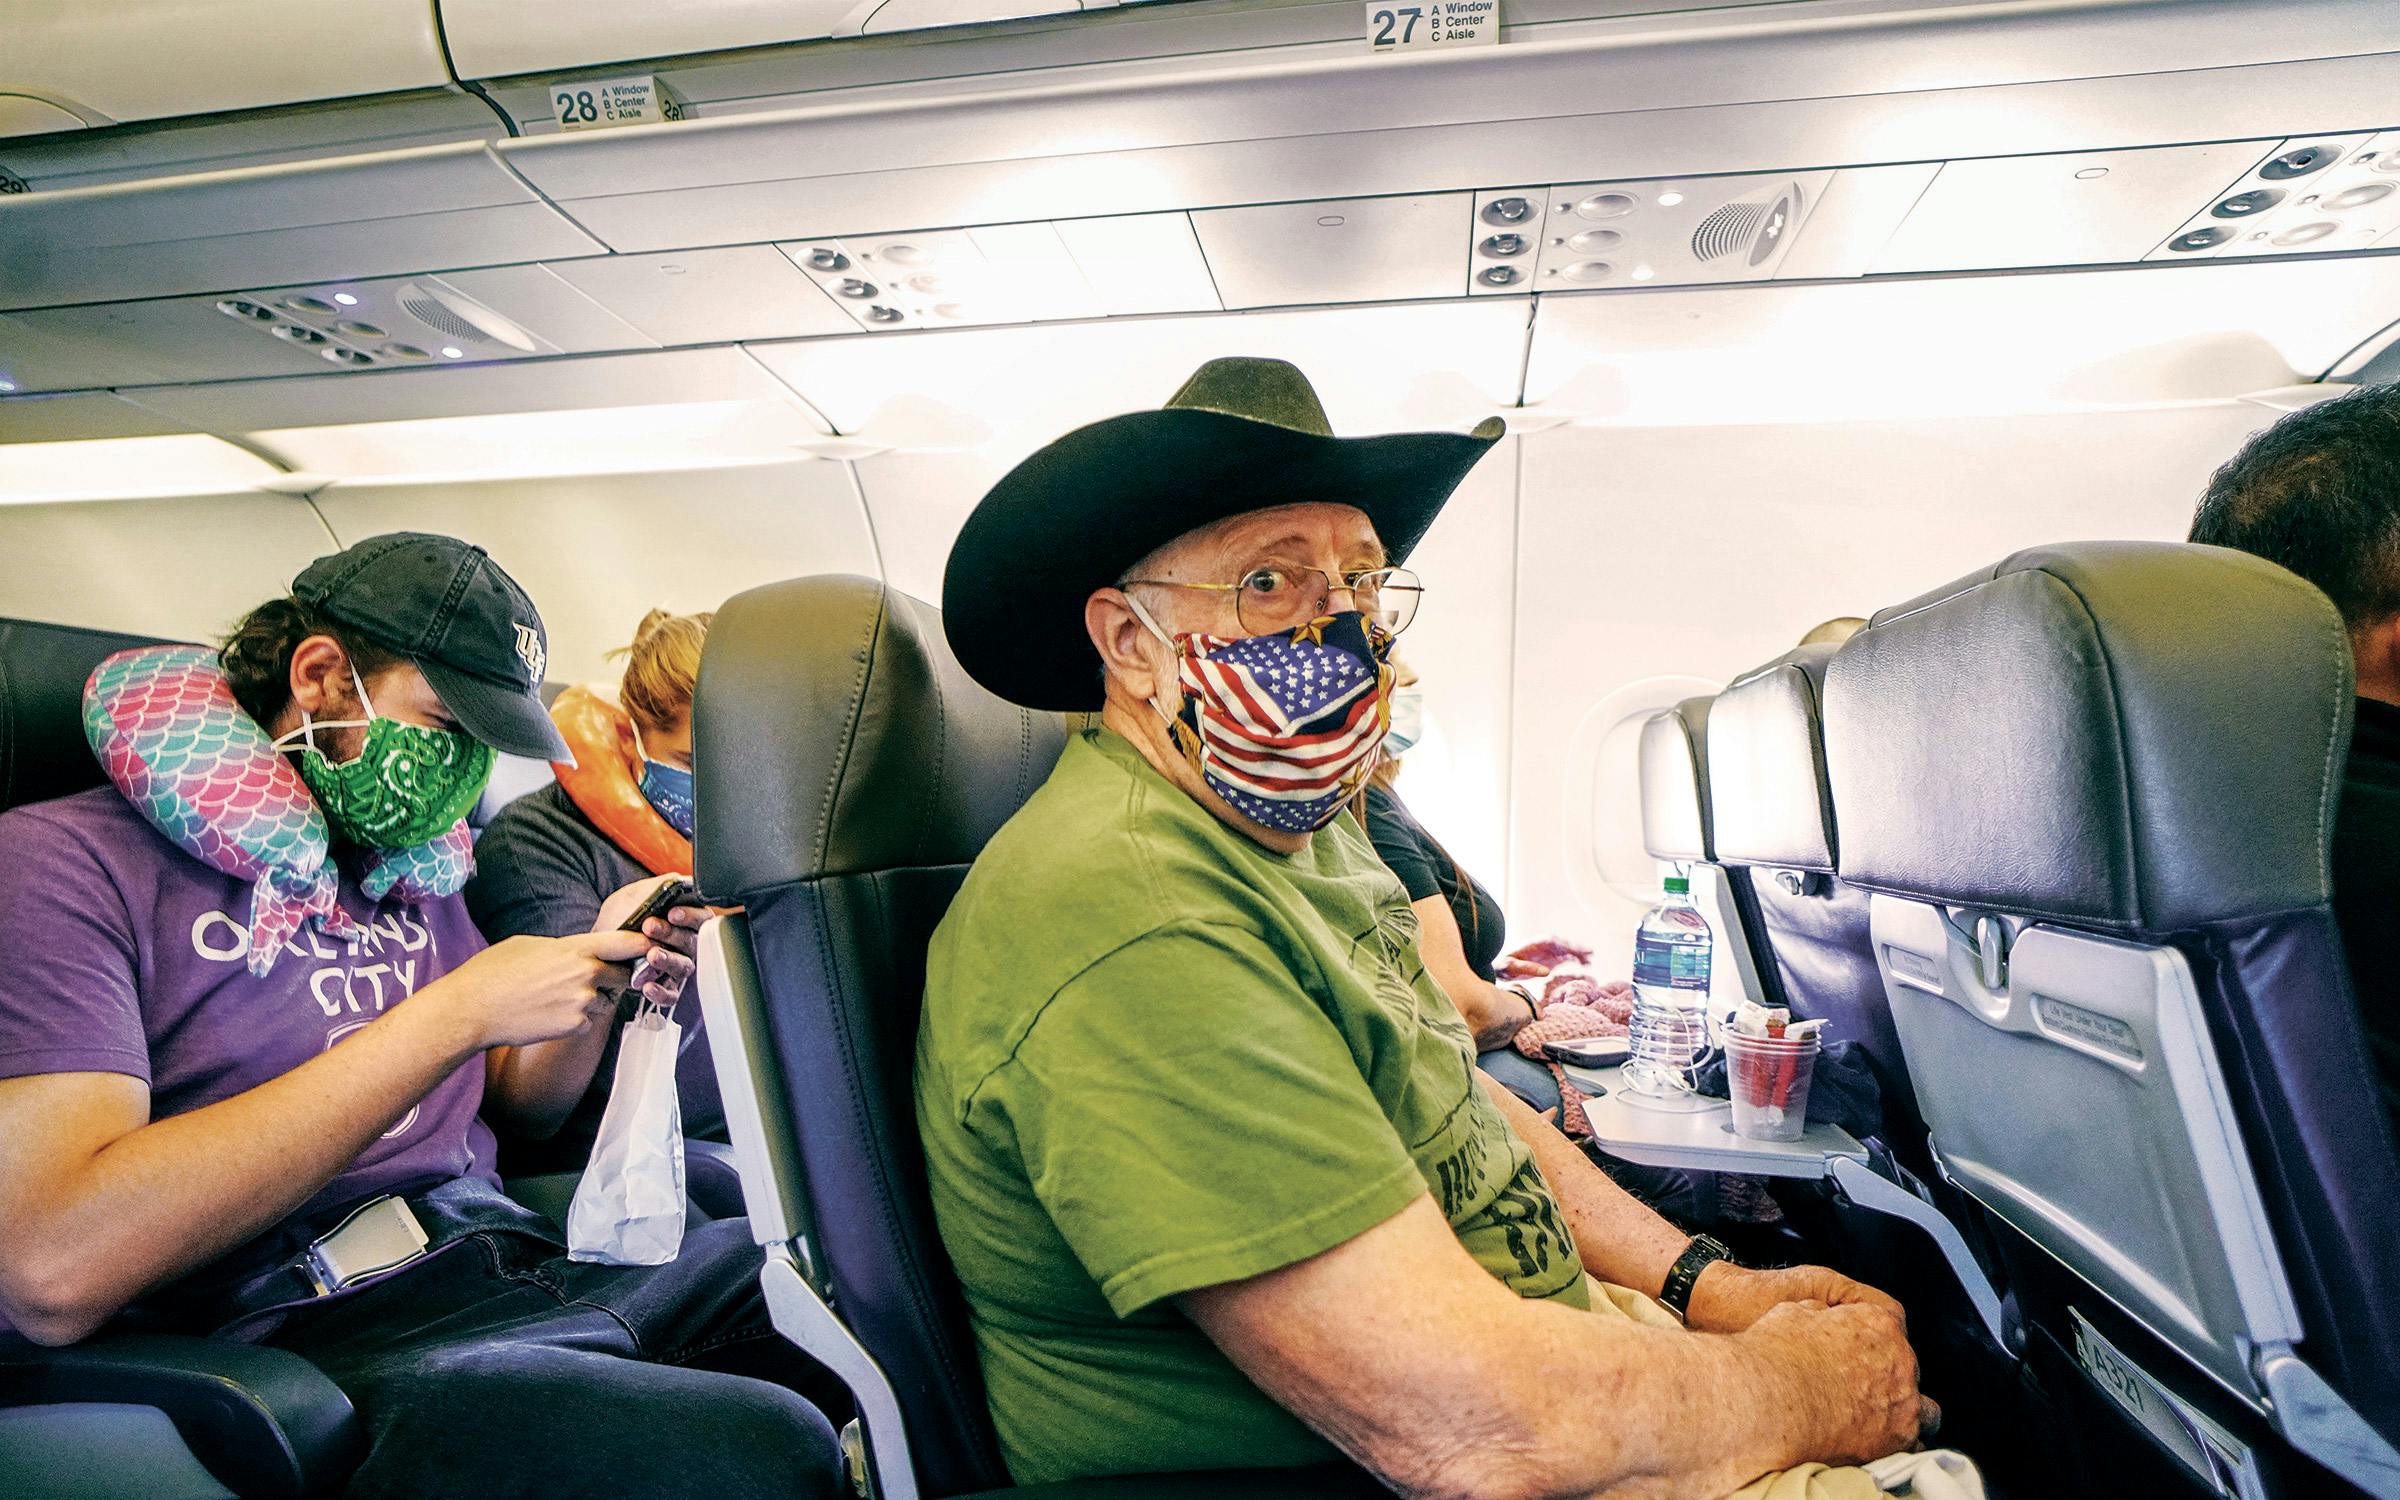 Why Is American Airlines So Infuriating? – Texas Monthly